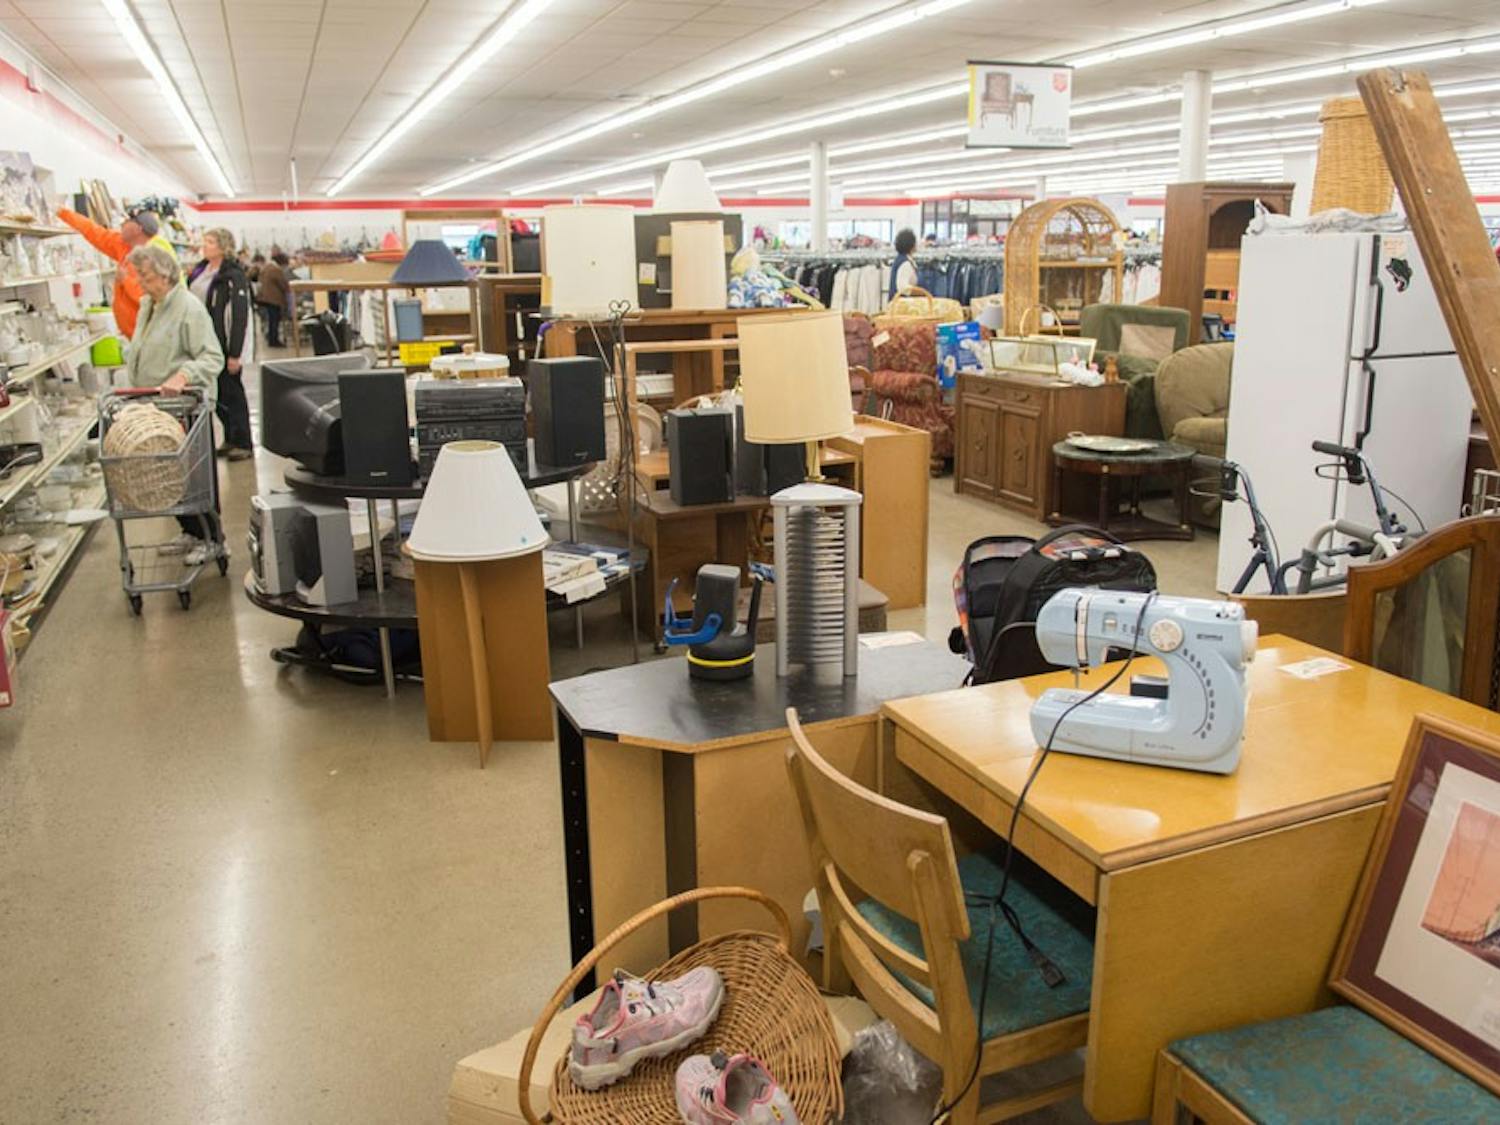 The Salvation Army, located a few miles off North Campus, is one option for students looking for cheap furniture.&nbsp;